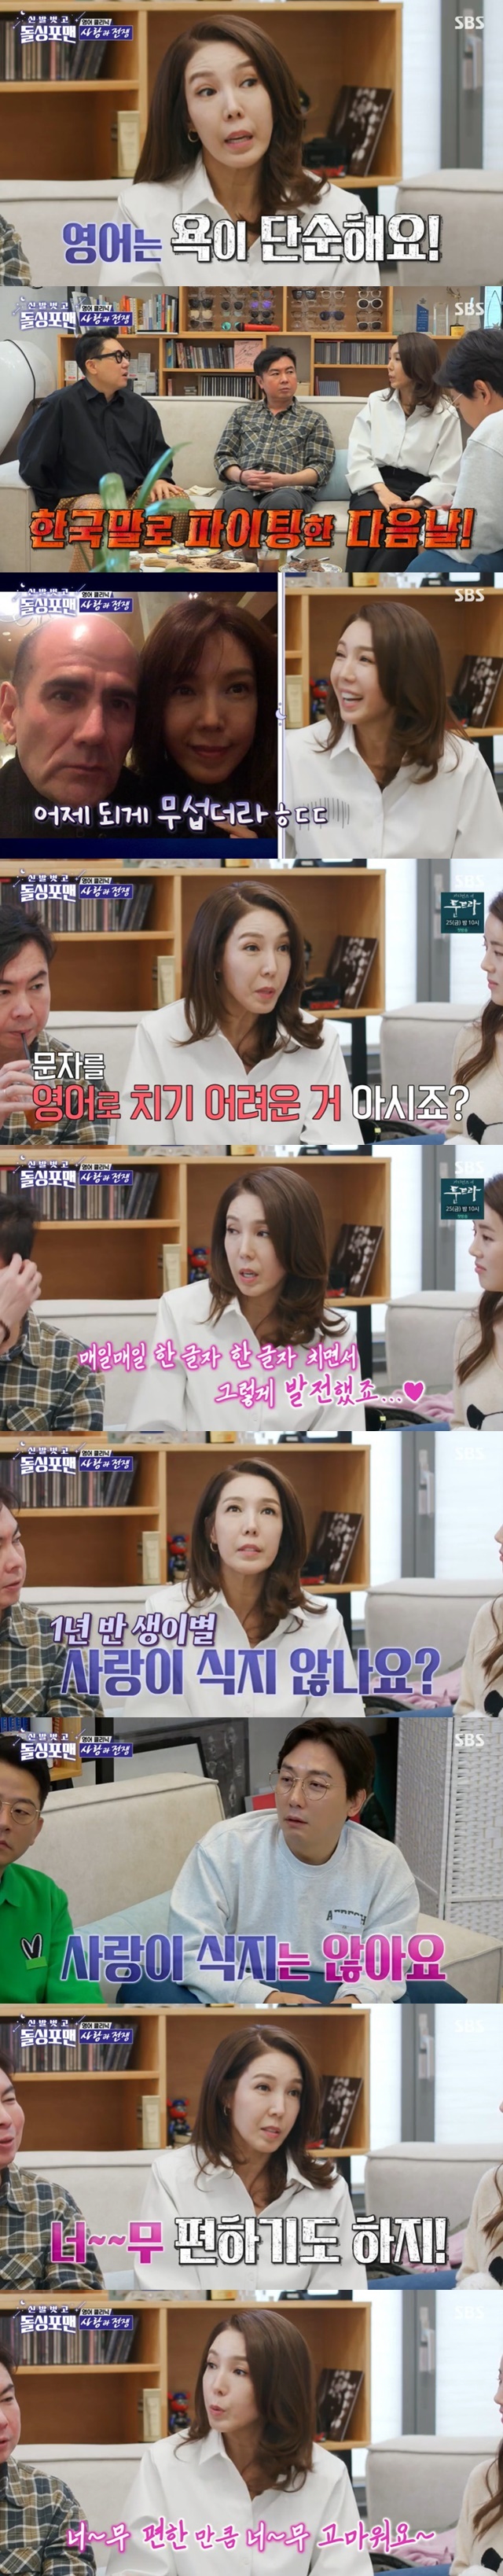 Jeon Soo-kyung said her American husband and Corona were separated for a year and a half.On SBS Take off your shoes and dolsing foreman broadcast on March 22, marriage writer divorce song Jeon Soo-kyung and Lee Gyoung-ryong appeared.On the day of the broadcast, Jeon Soo-kyung said, I have been married for seven years and eight years. It is not a full blind date, I was a stone singer, and he is a stone singer.I think it would be nice if we had a friend to know each other after having a soju on the weekend, he said.I ate pork belly and ate soju, not a chair, but sitting on the floor. My husband really likes pork belly, said Jeon Soo-kyung.Im good at drinking, and Im good at Korean. Im old, so I feel a little bit like a blind date. I couldnt go out too casual.It was very unfavorable to be English, but English is simple. Korean language is a cold spot, said Jeon Soo-kyung, who spoke with her husband in English and said, Im not good at English.When I got a fever at one point, I said, I swear in Korean. The next day, my husband said, I was so scared yesterday.Dolsing Forman Tak Jae-hoon, Lim Won-hee, Lee Sang-min, and Kim Jun-ho played a couple fight situation with Jeon Soo-kyung in English, and Jeon Soo-kyung boasted natural English skills.You have to text because youre going to meet a boyfriend, said Jeon Soo-kyung, and you dont know how difficult it is to write in English, do you?I heard people texting in English, saying, Then people have developed.Ive got a shorter English, and if I dont speak English for a day, my skills will be reduced, said Jeon Soo-kyung.My husband has been out for a year and a half (overseas) to open a foreign hotel since construction.I have been making video calls since I could not go back and forth to Coronara. I confessed that my English skills have decreased because I have been living with my husband for a year and a half.